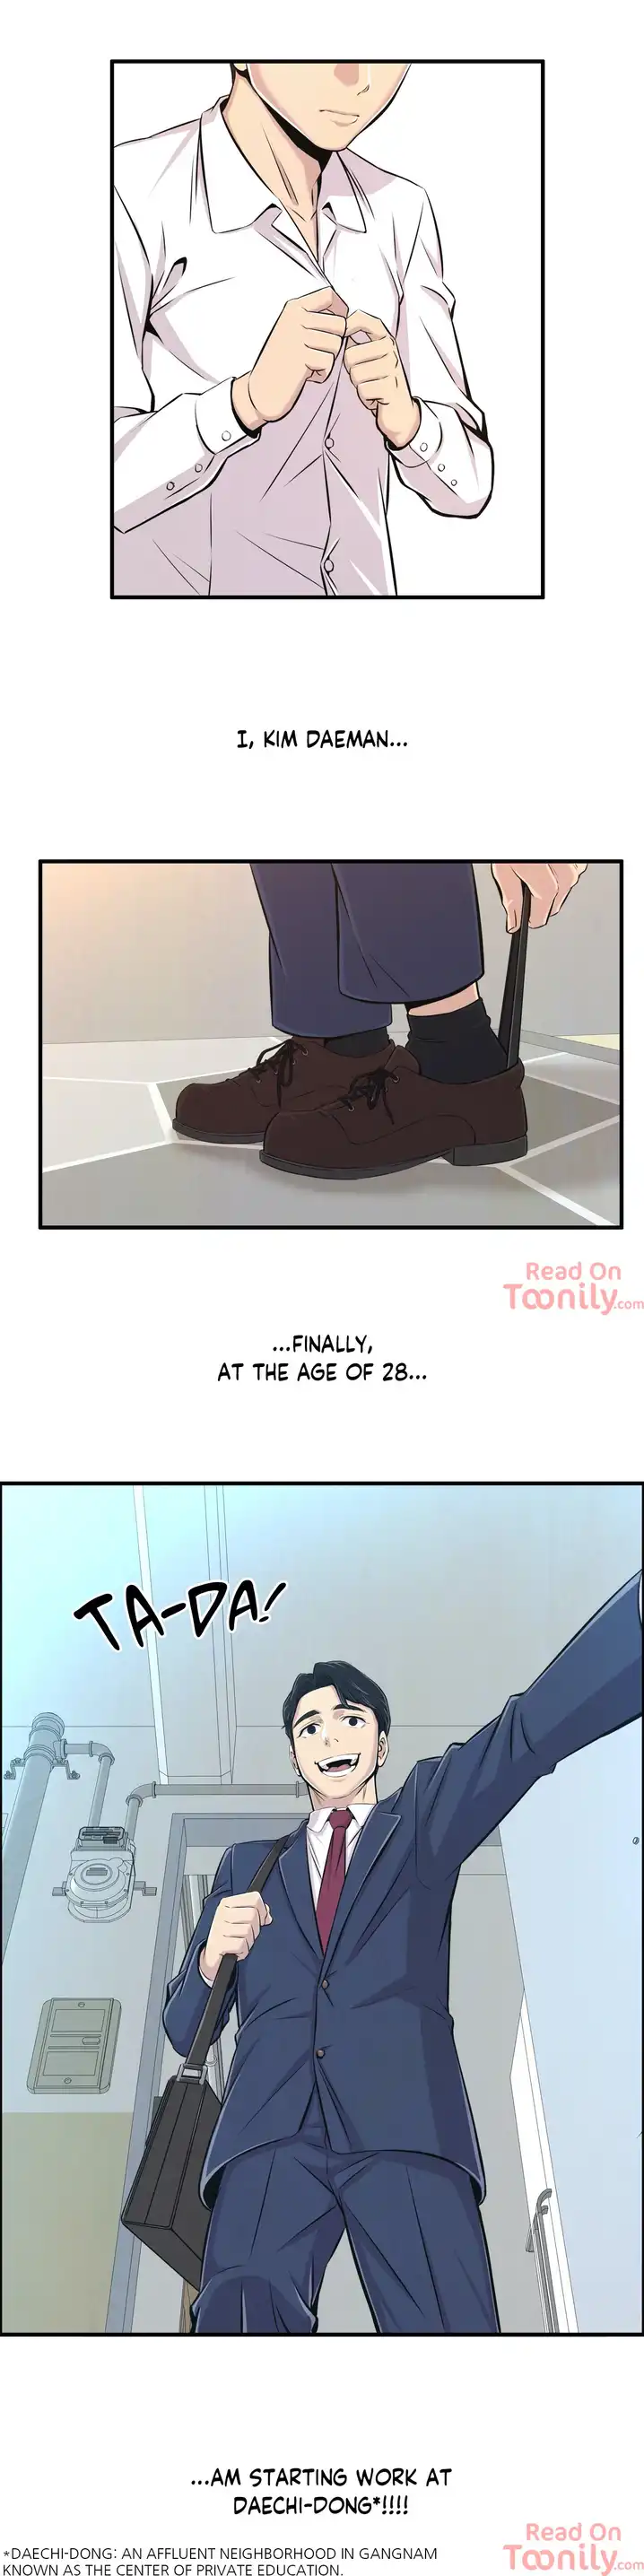 Cram School Scandal - Chapter 1 Page 1